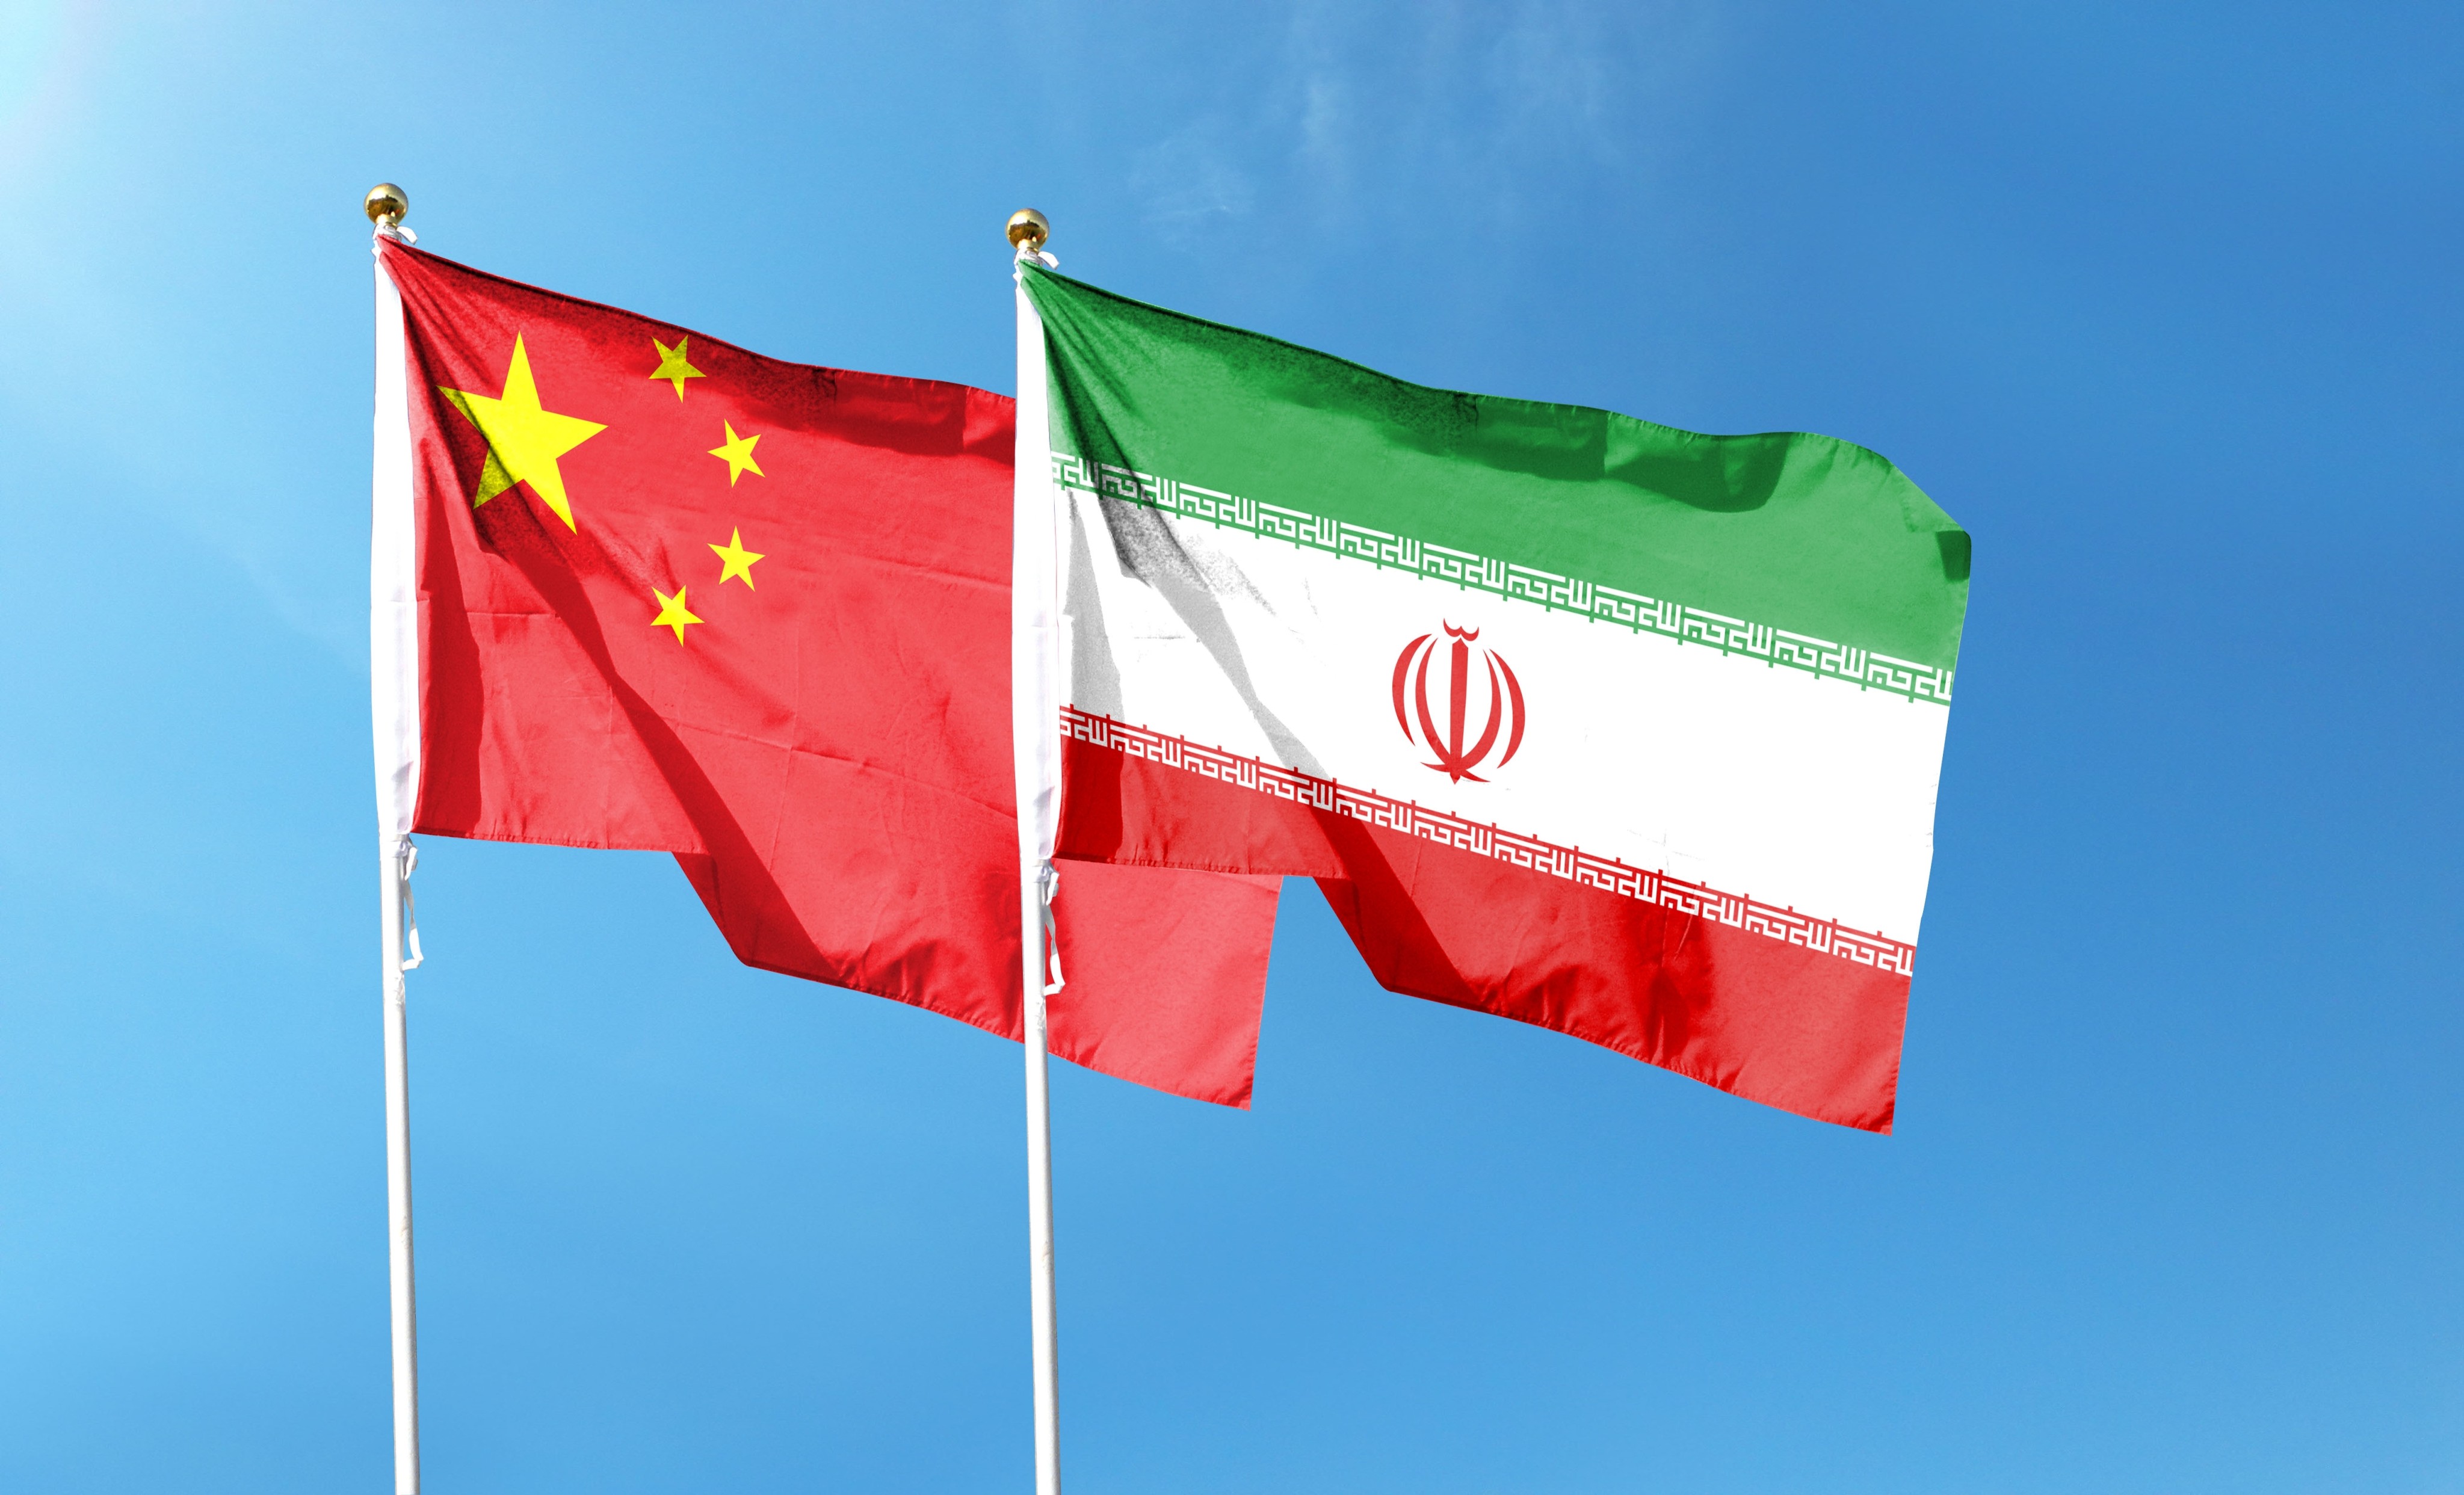 Beijing’s ambassador to Iran Chang Hua called the December opening of the Chinese consulate in Bandar Abbas a ‘“fresh landmark moment” in bilateral ties. Photo: Shutterstock